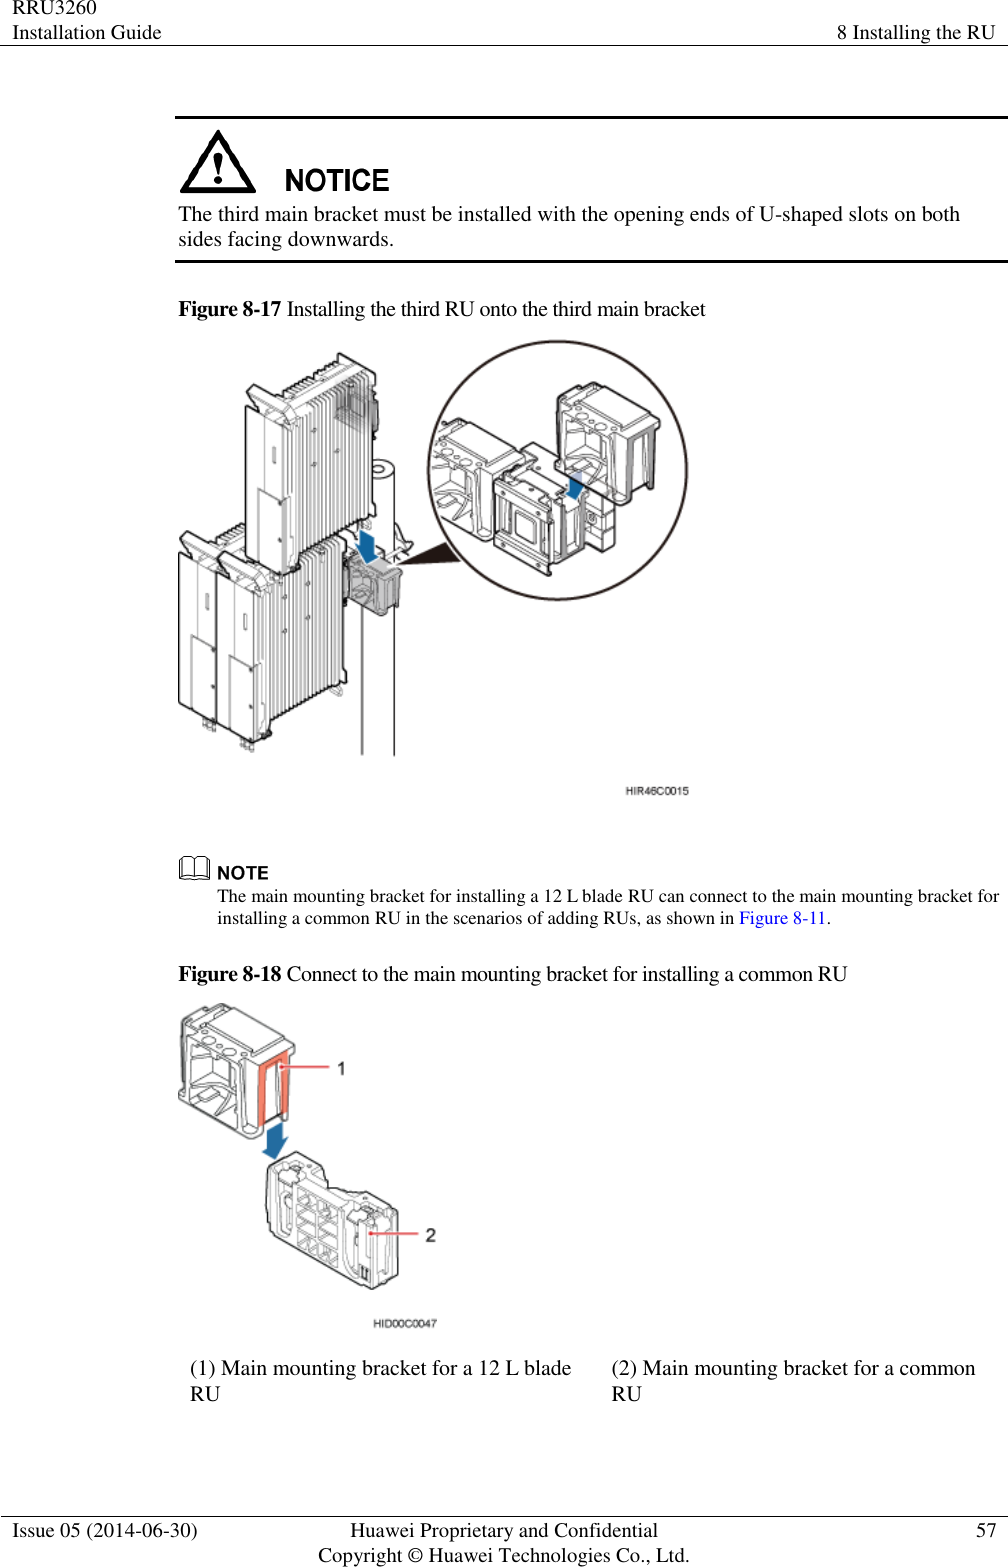 RRU3260 Installation Guide 8 Installing the RU  Issue 05 (2014-06-30) Huawei Proprietary and Confidential                                     Copyright © Huawei Technologies Co., Ltd. 57    The third main bracket must be installed with the opening ends of U-shaped slots on both sides facing downwards. Figure 8-17 Installing the third RU onto the third main bracket    The main mounting bracket for installing a 12 L blade RU can connect to the main mounting bracket for installing a common RU in the scenarios of adding RUs, as shown in Figure 8-11. Figure 8-18 Connect to the main mounting bracket for installing a common RU  (1) Main mounting bracket for a 12 L blade RU (2) Main mounting bracket for a common RU  